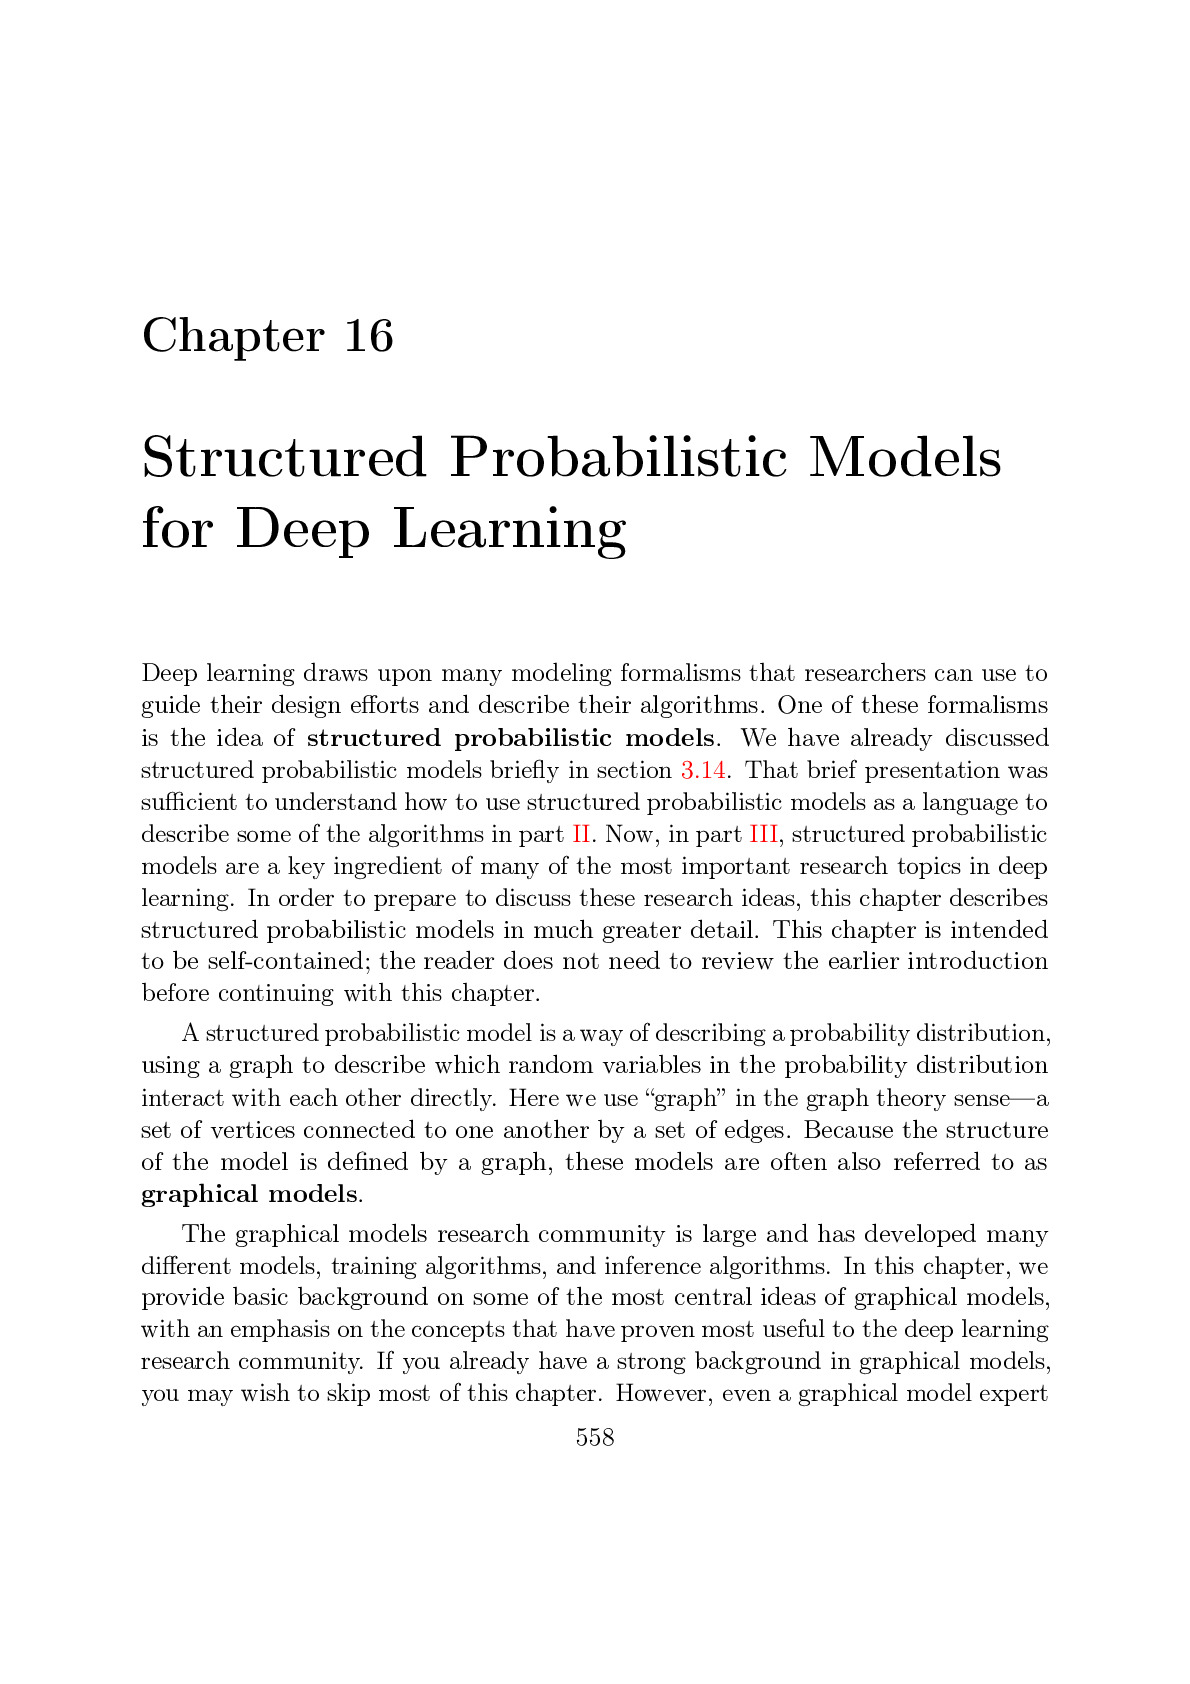 16 Structured Probabilistic Models for Deep Learning